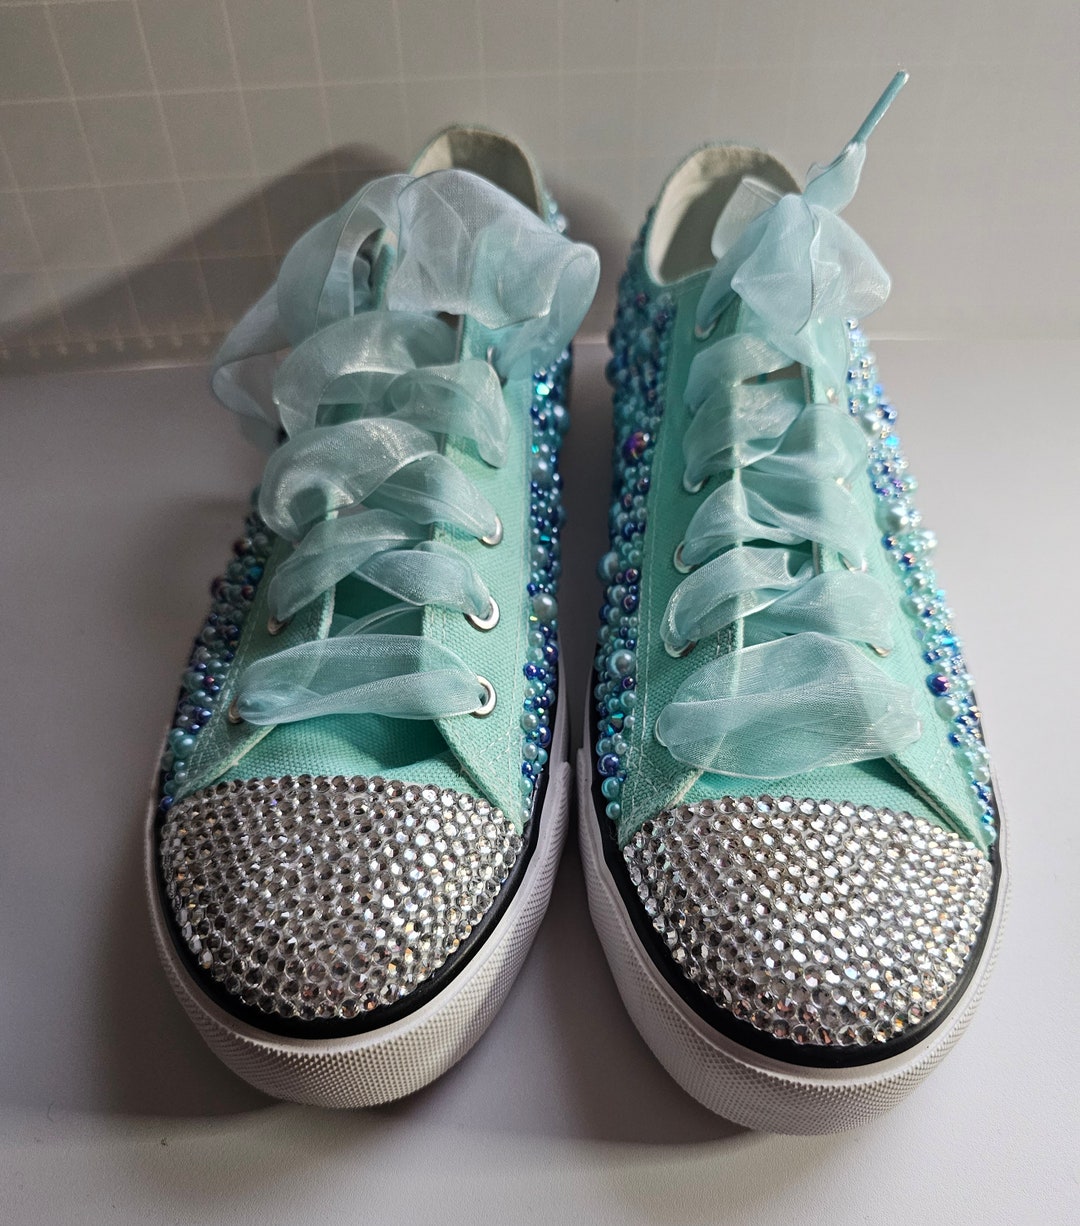 Rhinestone Tennis Shoes With Custom Colors This Listing is for Low Top ...